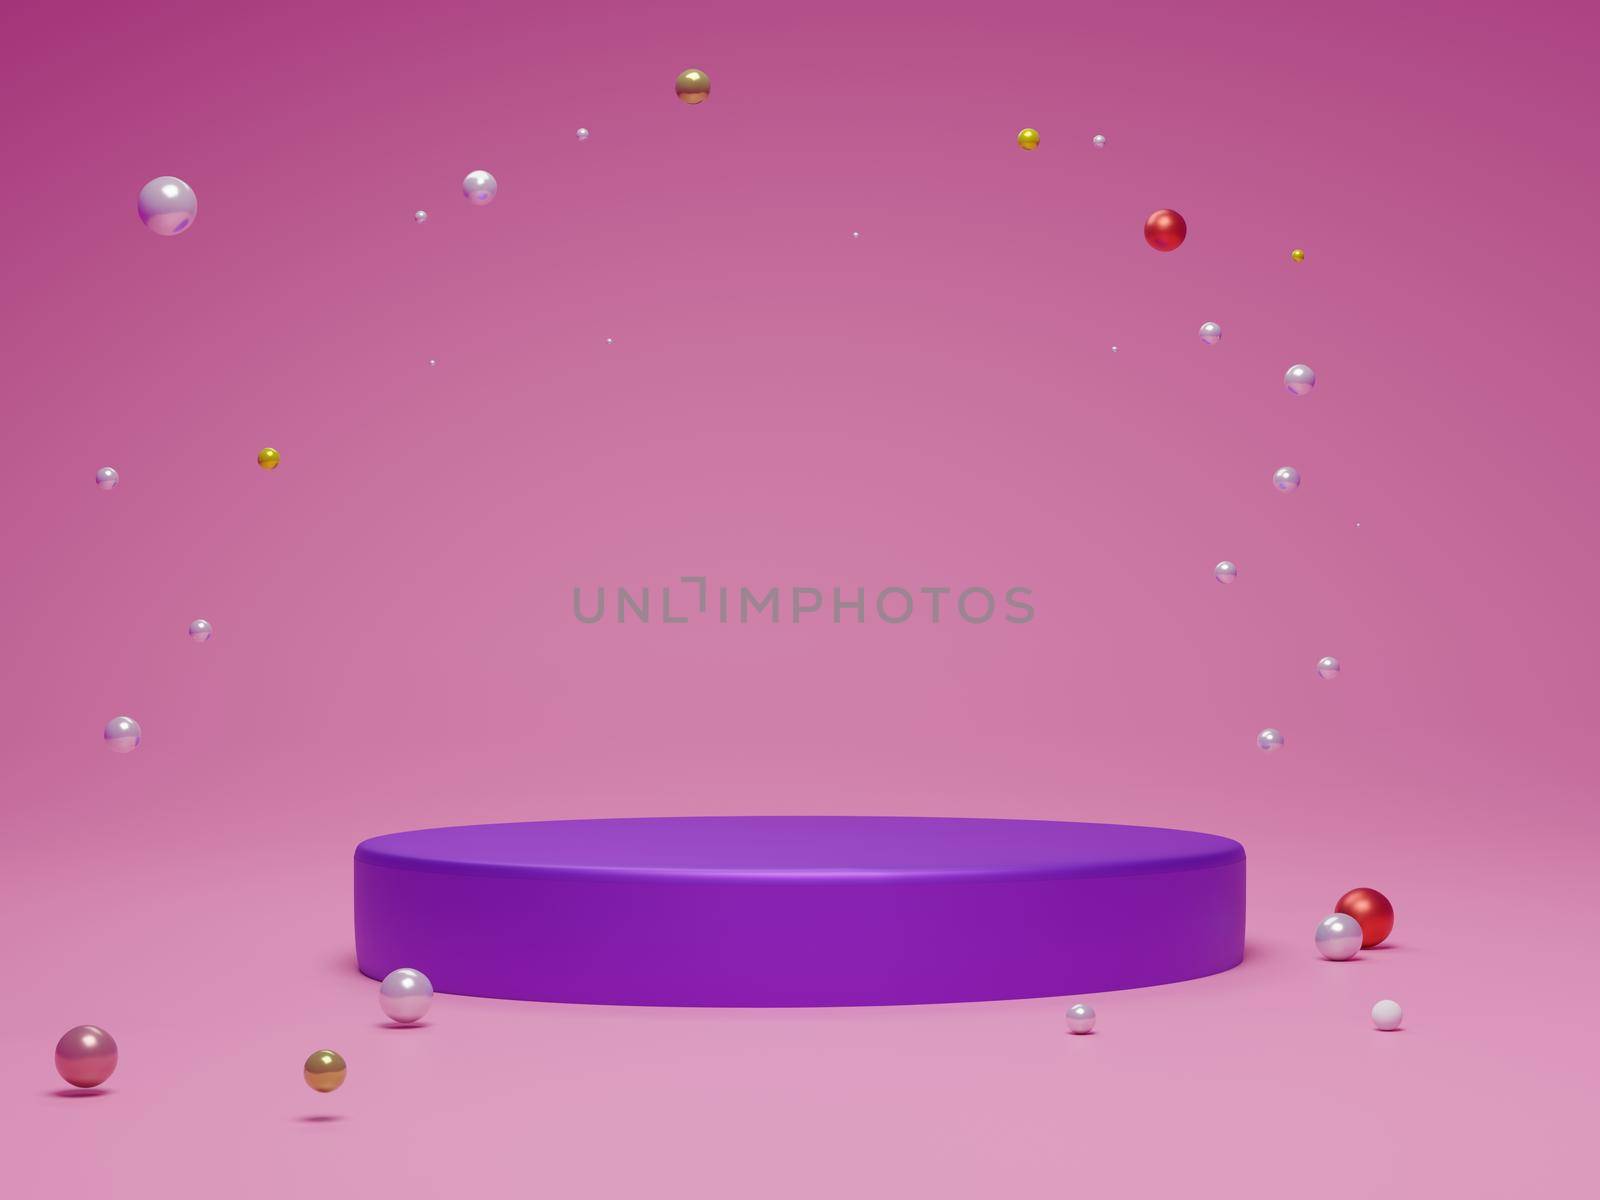 purple geometric circle background vertical display simple pedestal mockup display stand product or brand in product launch and commercial product concept pink background 3d rendering by noppha80